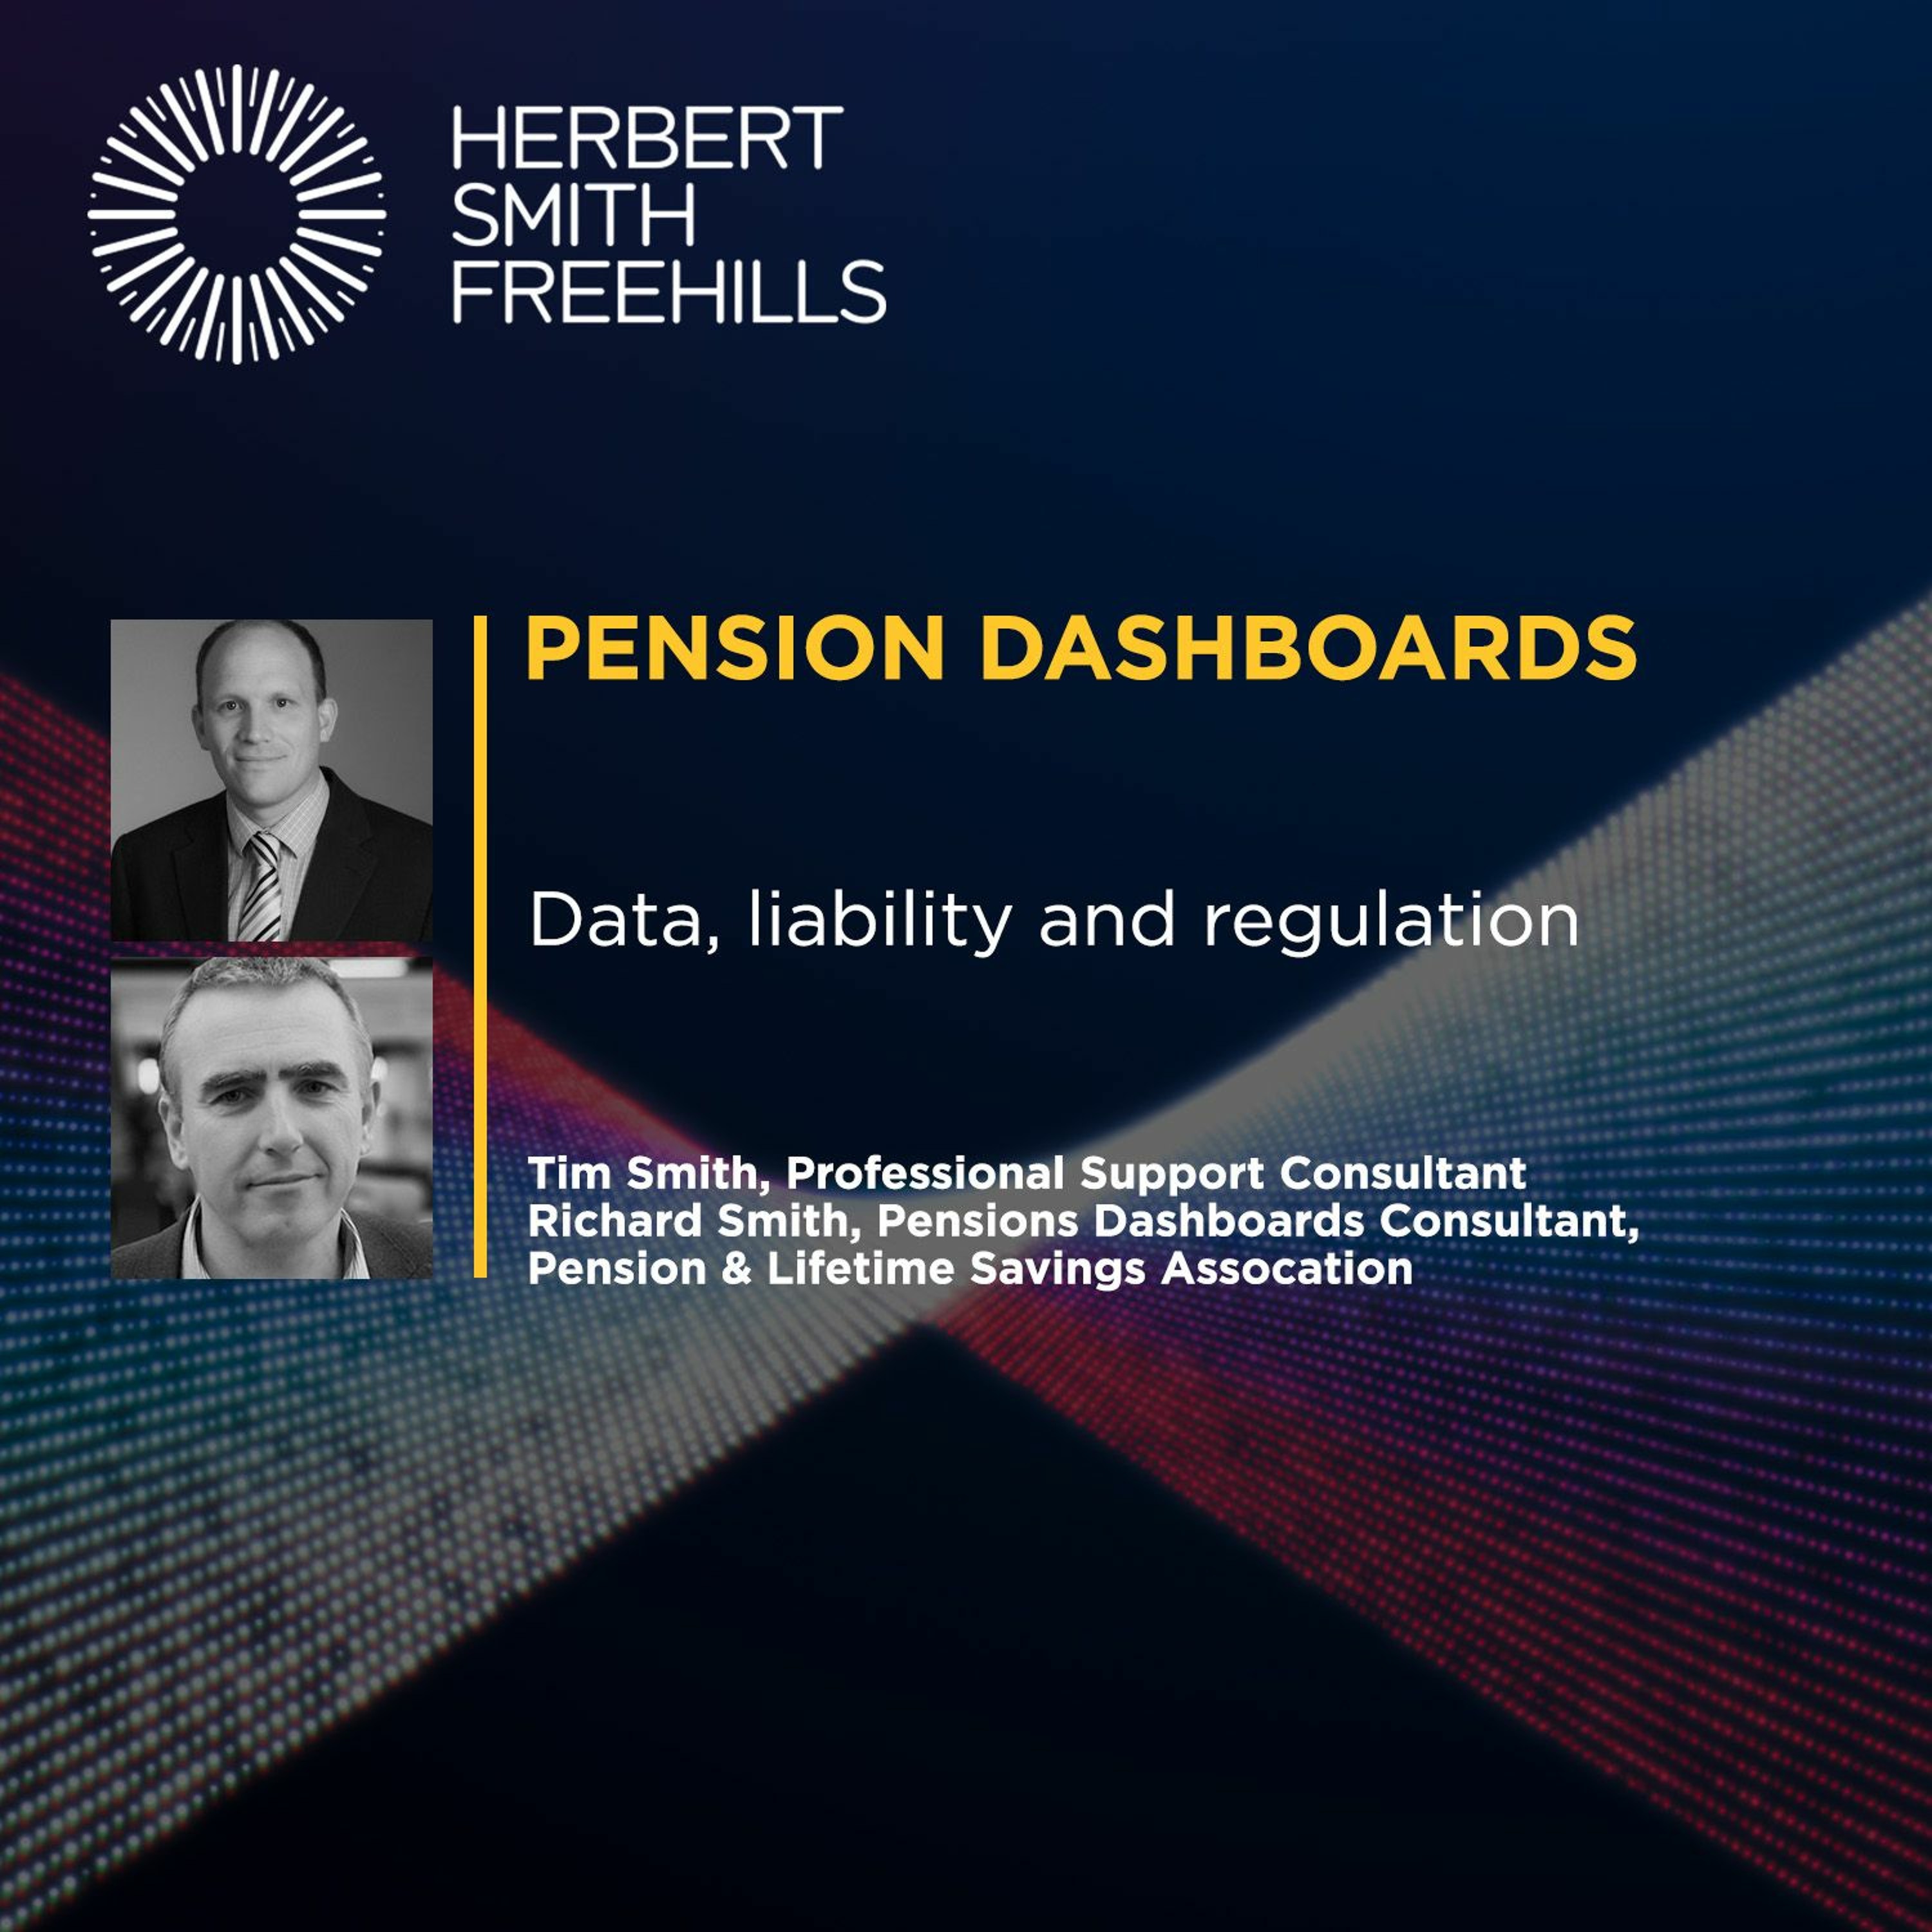 Pension dashboards: data, liability and regulation